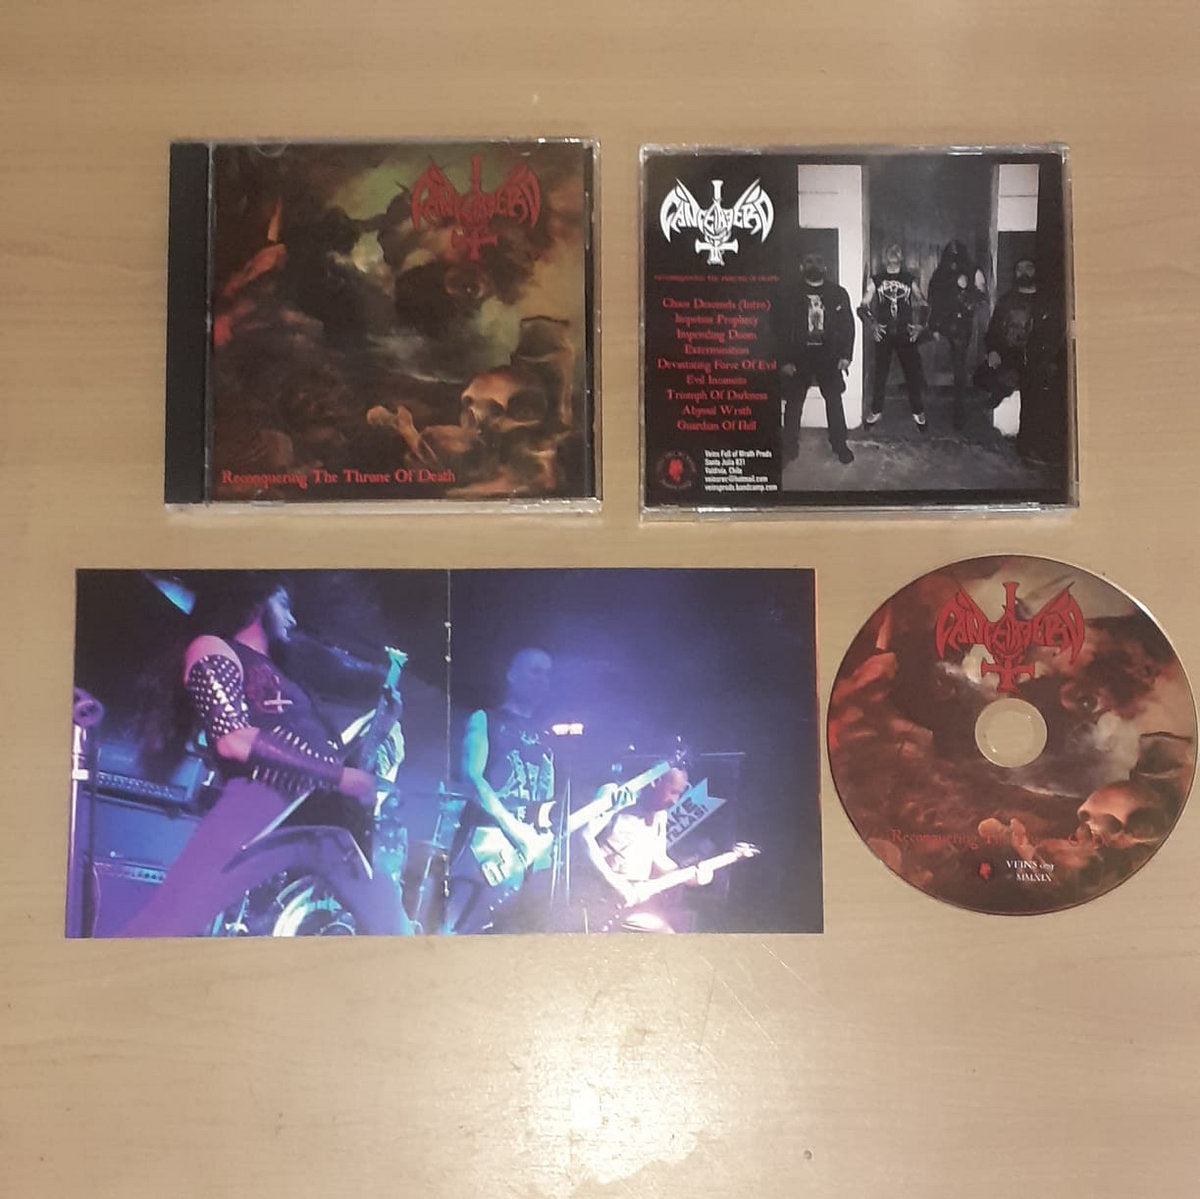 CANCERBERO (CHILE) "Reconquering The Throne Of Death" - CDs